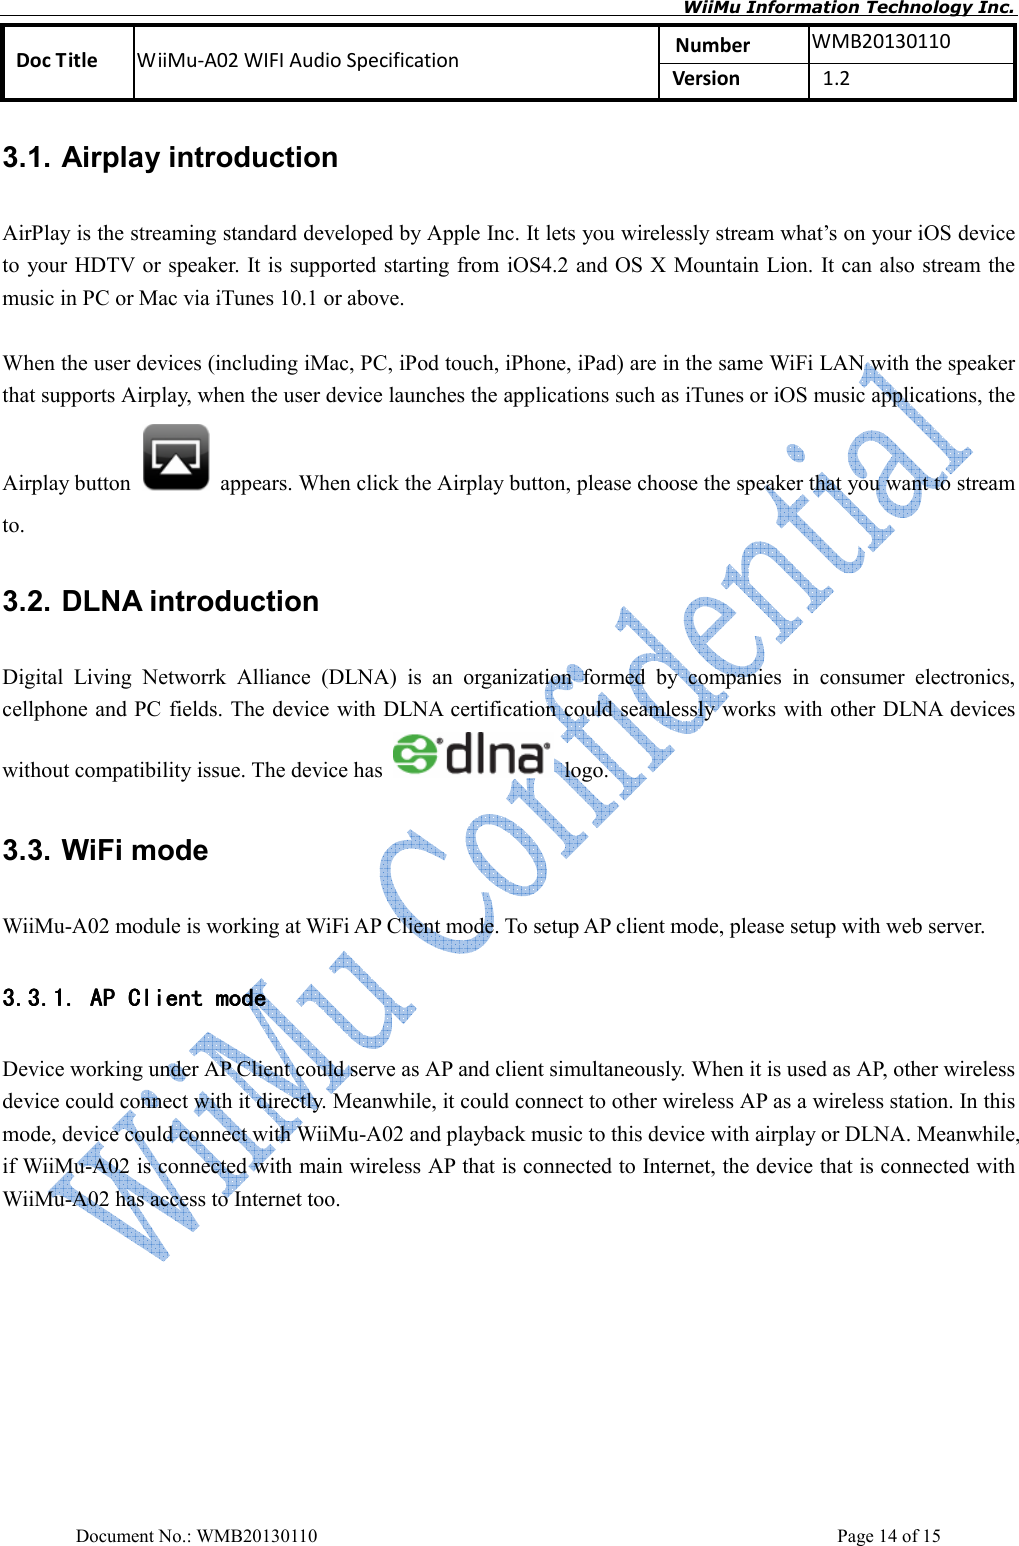       WiiMu Information Technology Inc. Number  WMB20130110 Doc Title  WiiMu-A02 WIFI Audio Specification  Version    1.2  Document No.: WMB20130110    Page 14 of 15 3.1. Airplay introduction AirPlay is the streaming standard developed by Apple Inc. It lets you wirelessly stream what’s on your iOS device to your HDTV or speaker. It is supported starting from iOS4.2 and OS X Mountain Lion. It can also stream the music in PC or Mac via iTunes 10.1 or above.                When the user devices (including iMac, PC, iPod touch, iPhone, iPad) are in the same WiFi LAN with the speaker that supports Airplay, when the user device launches the applications such as iTunes or iOS music applications, the Airplay button    appears. When click the Airplay button, please choose the speaker that you want to stream to.    3.2. DLNA introduction Digital  Living  Networrk  Alliance  (DLNA)  is  an  organization  formed  by  companies  in  consumer  electronics, cellphone and PC  fields. The device with DLNA certification could seamlessly works  with other DLNA devices without compatibility issue. The device has    logo.   3.3. WiFi mode WiiMu-A02 module is working at WiFi AP Client mode. To setup AP client mode, please setup with web server.   3.3.1.3.3.1.3.3.1.3.3.1. AAAAP ClientP ClientP ClientP Client mode mode mode mode    Device working under AP Client could serve as AP and client simultaneously. When it is used as AP, other wireless device could connect with it directly. Meanwhile, it could connect to other wireless AP as a wireless station. In this mode, device could connect with WiiMu-A02 and playback music to this device with airplay or DLNA. Meanwhile, if WiiMu-A02 is connected with main wireless AP that is connected to Internet, the device that is connected with WiiMu-A02 has access to Internet too.   